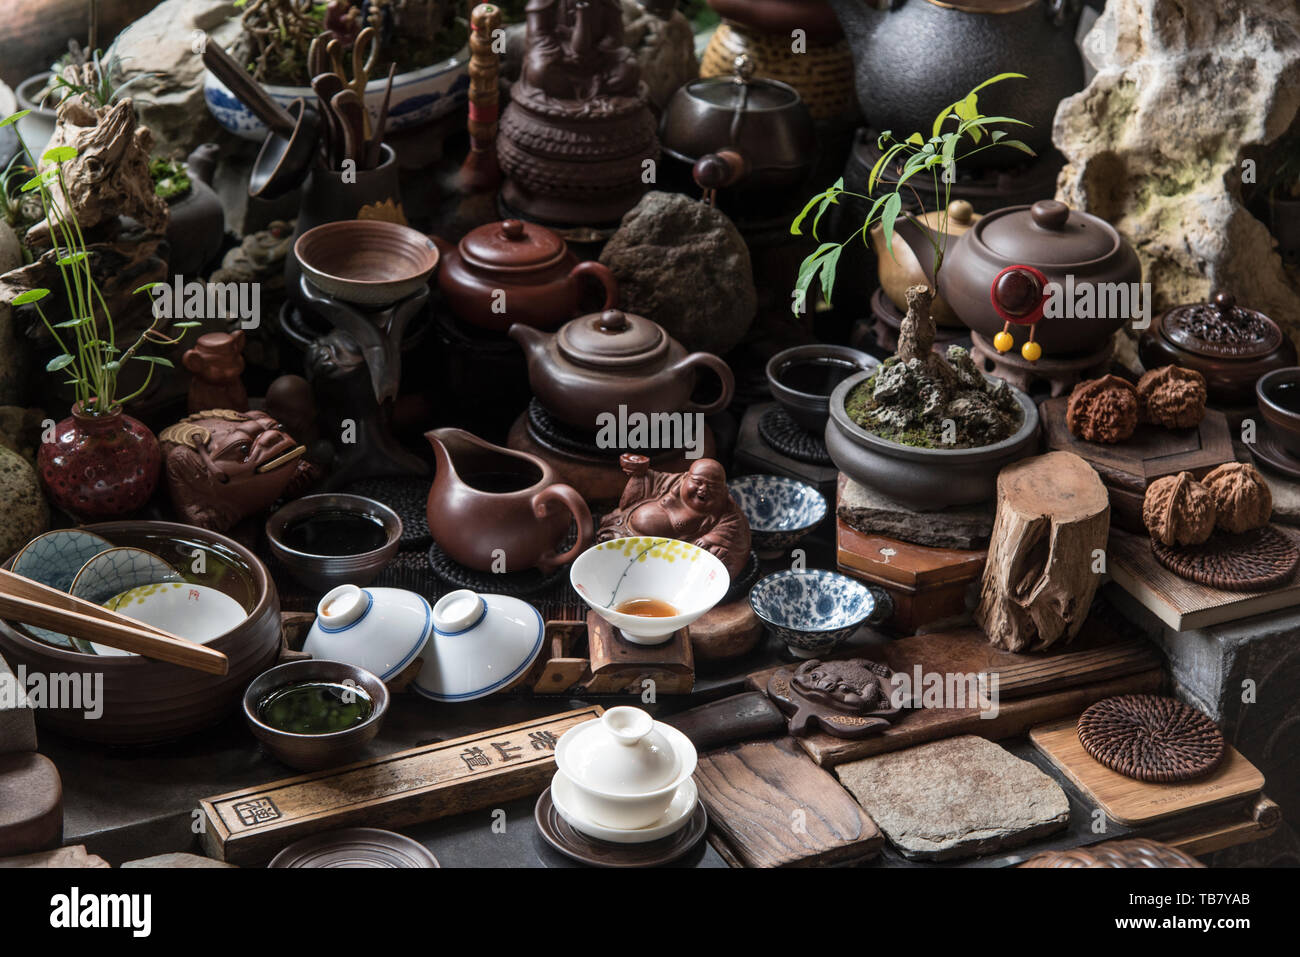 Ceramic teapots and tea ceremony cups on display in Chengdu, Sichuan, China Stock Photo